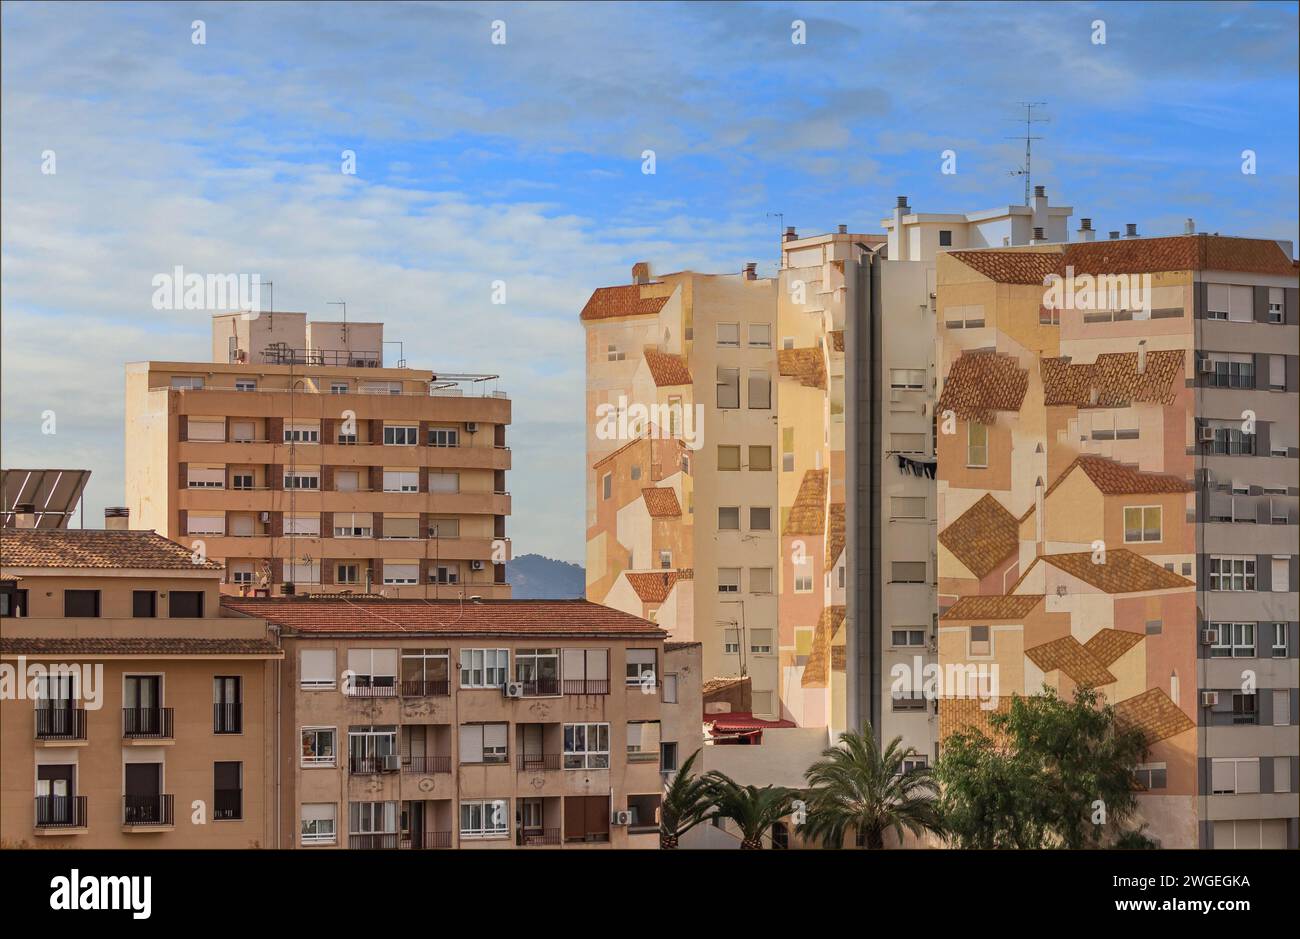 Unique wall art on the side of tower blocks depicting the rooftops of a small town Stock Photo